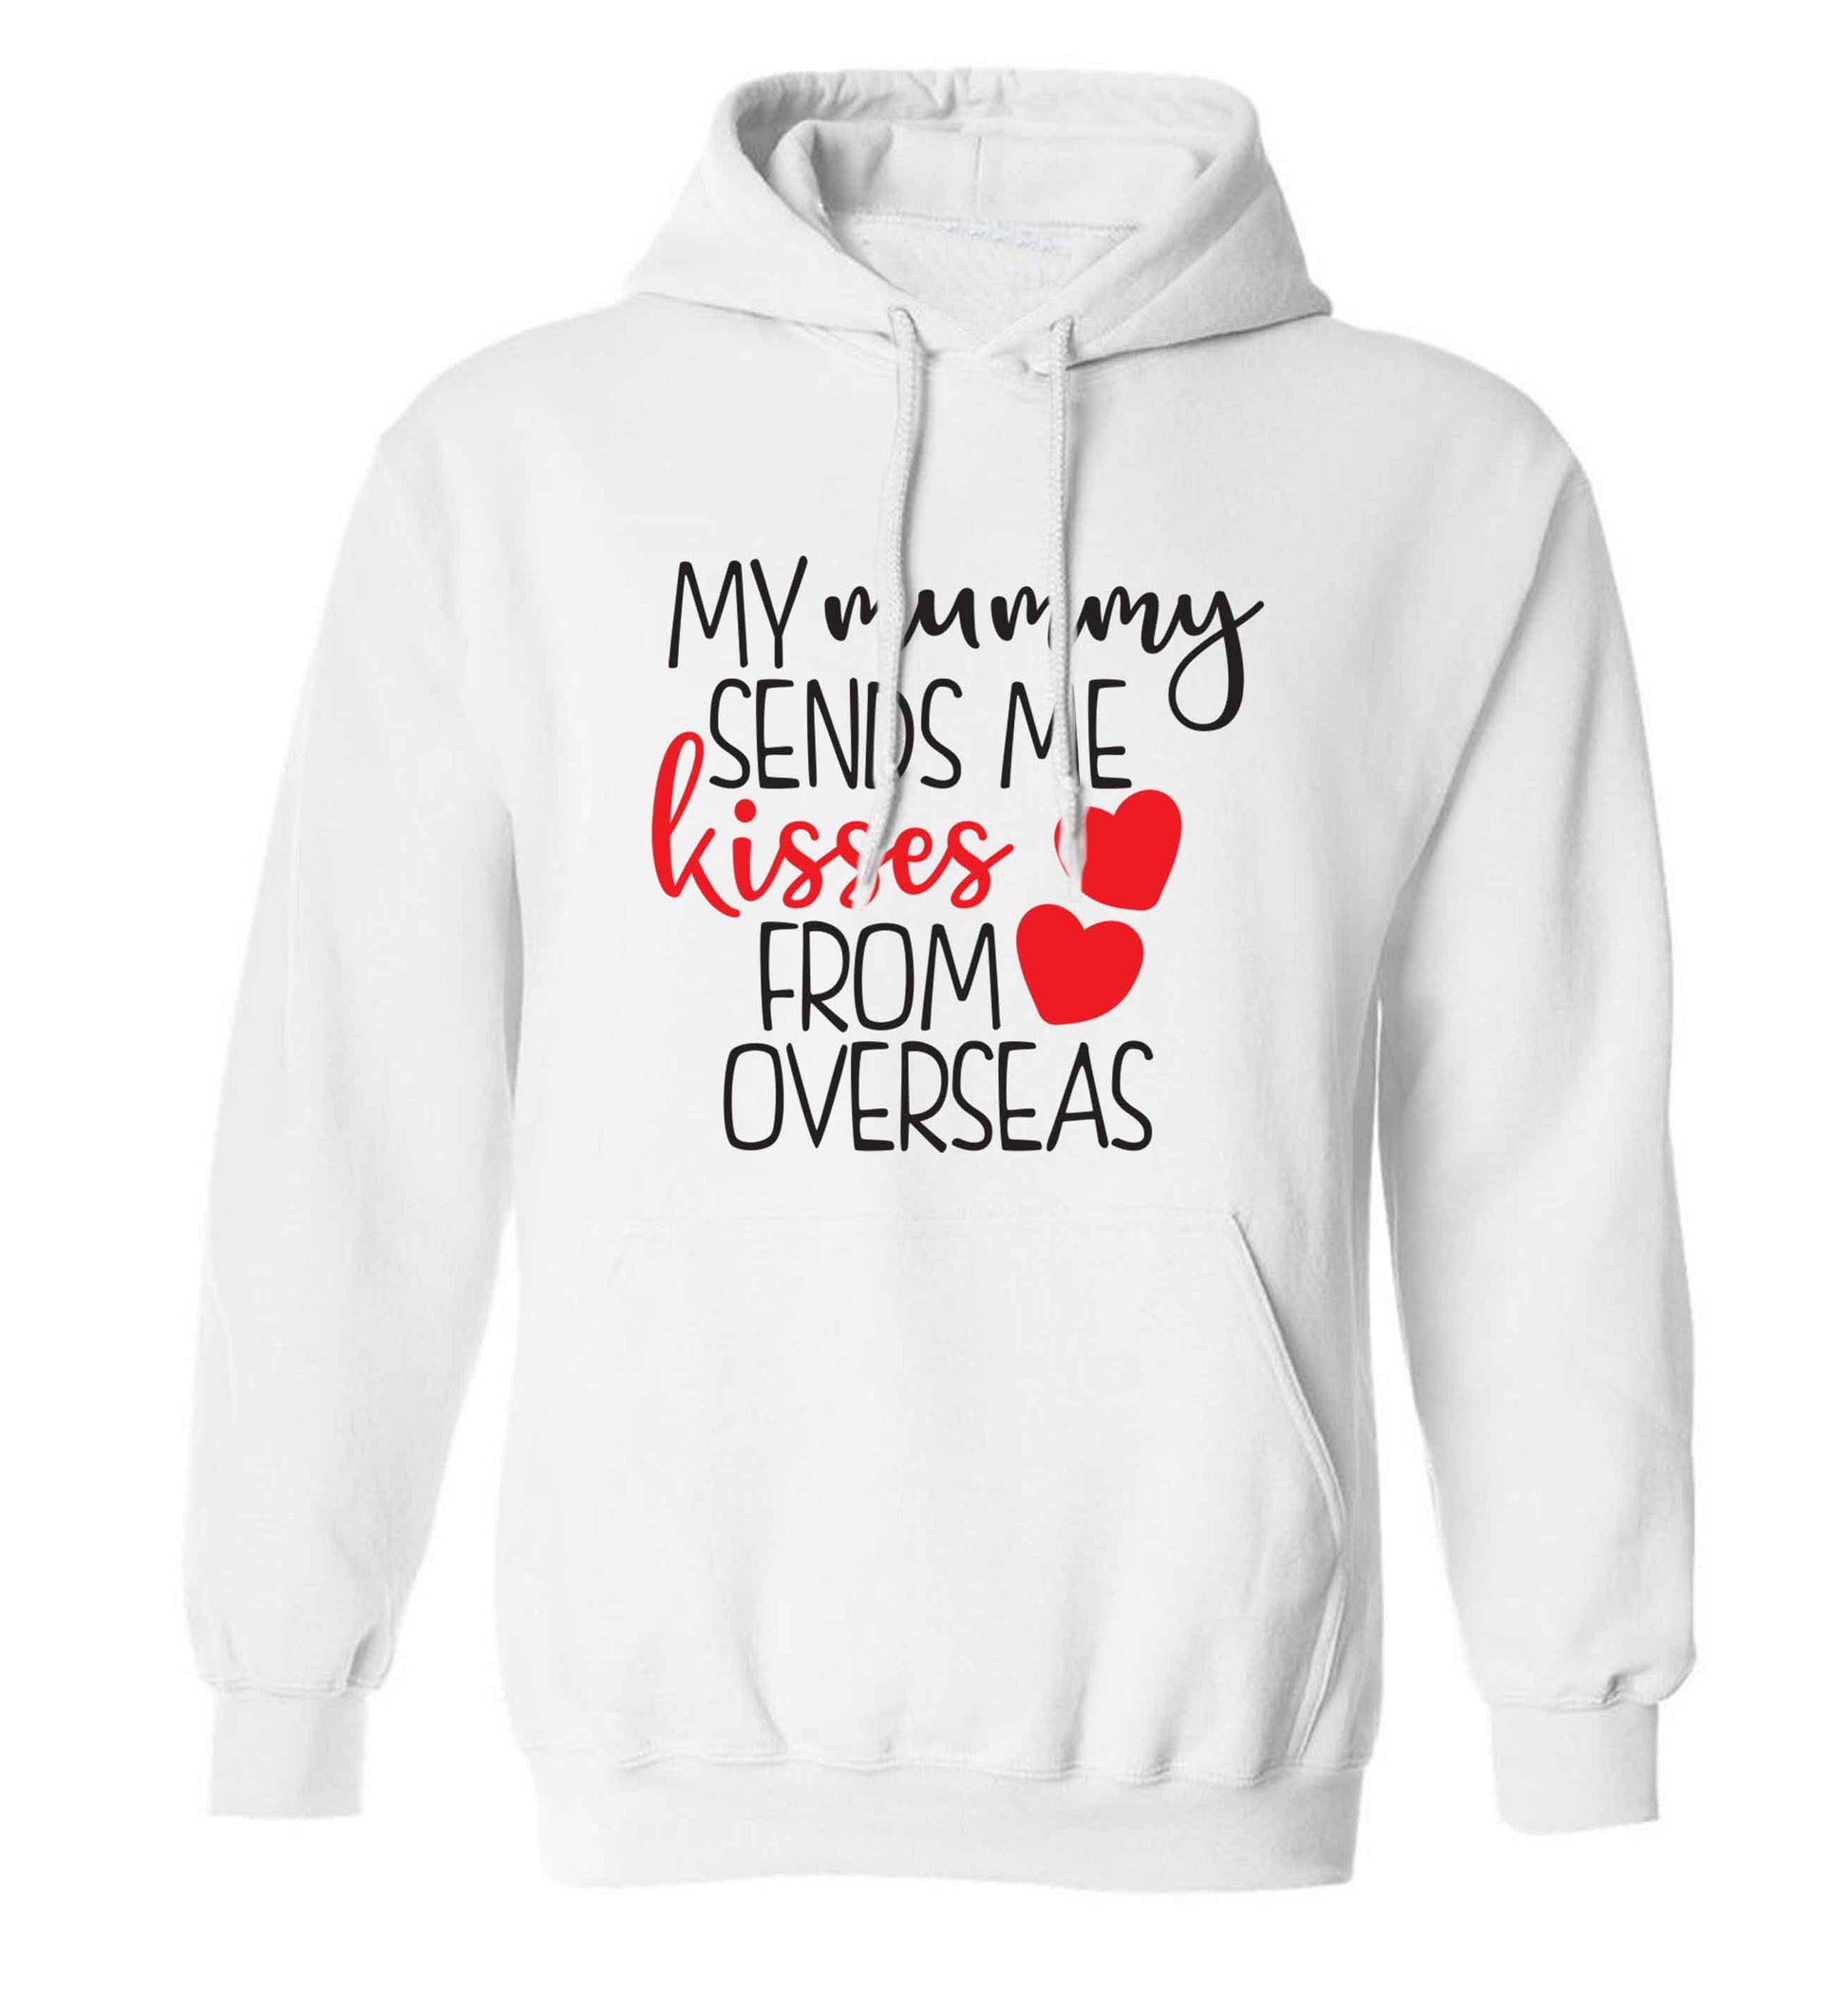 My mummy sends me kisses from overseas adults unisex white hoodie 2XL